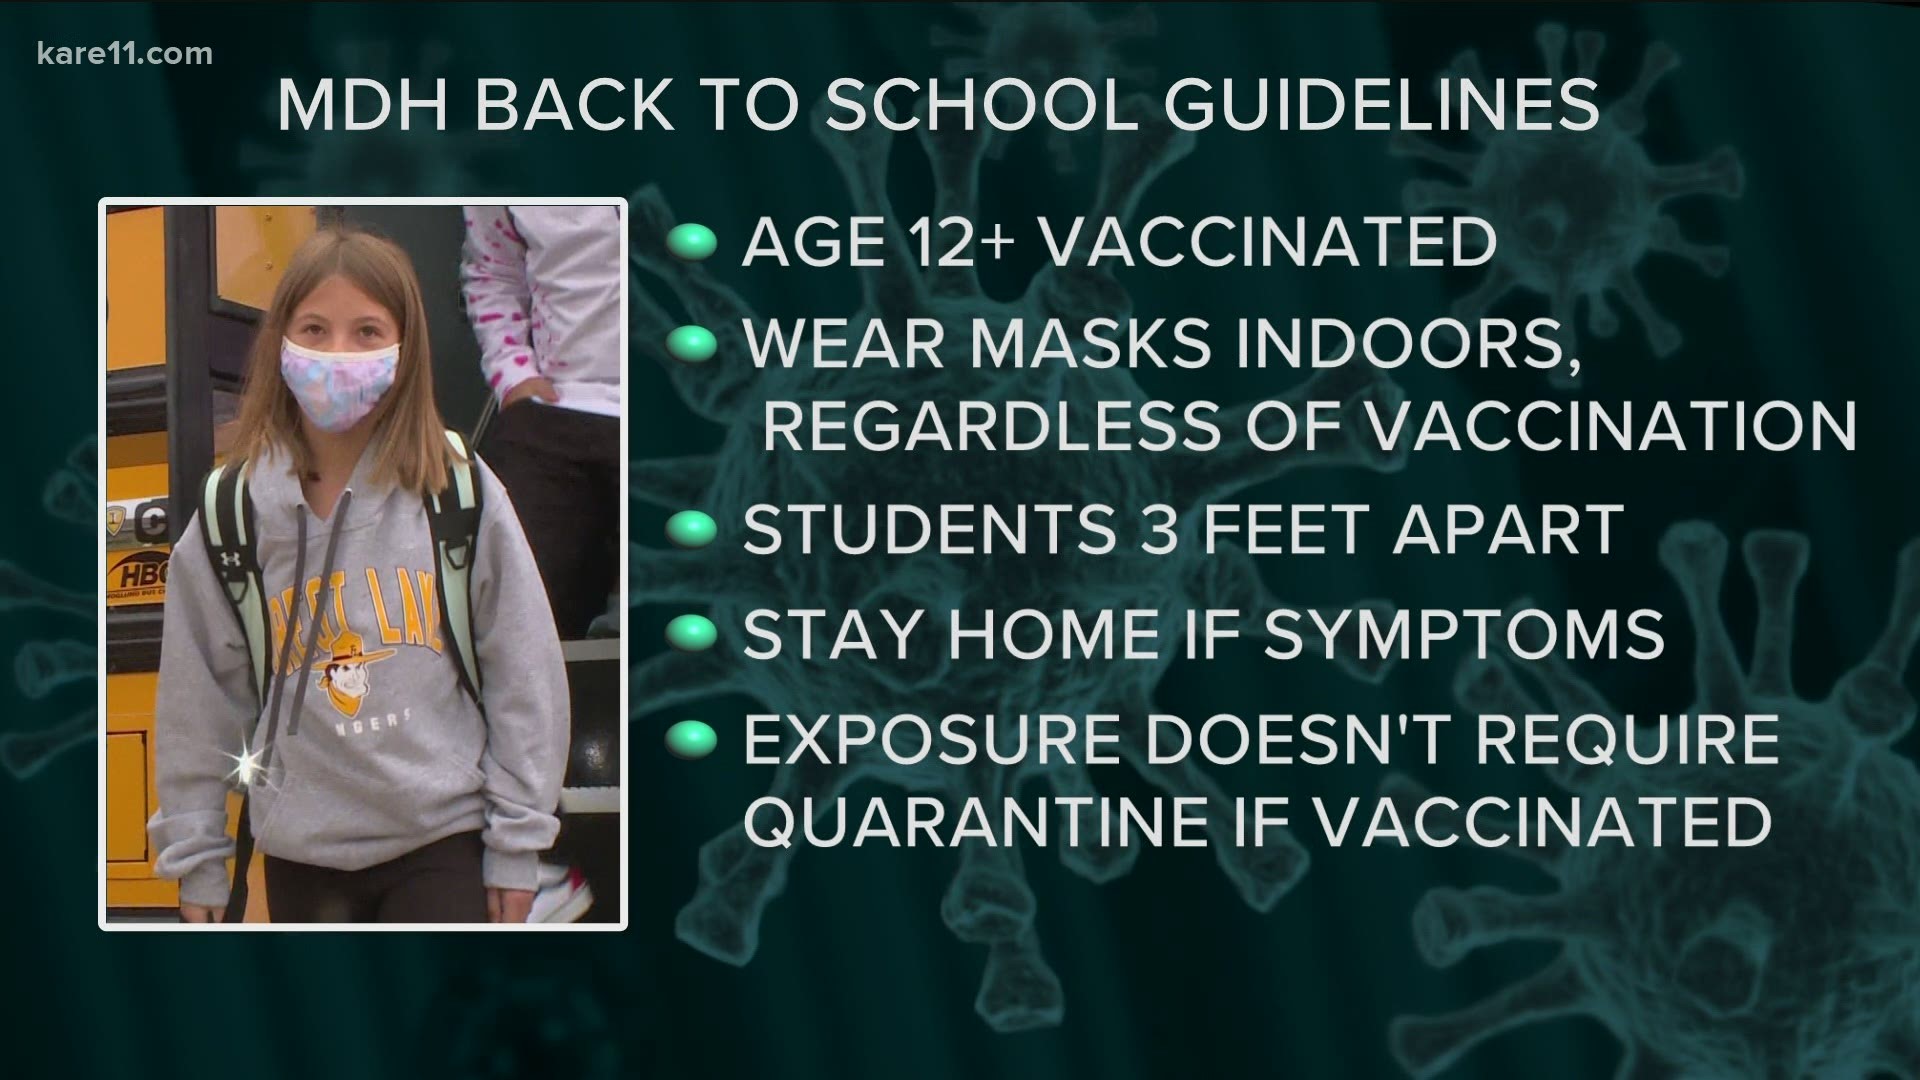 MDH's other recommendations include social distancing and vaccines for all who are old enough. The guidelines are not mandatory.